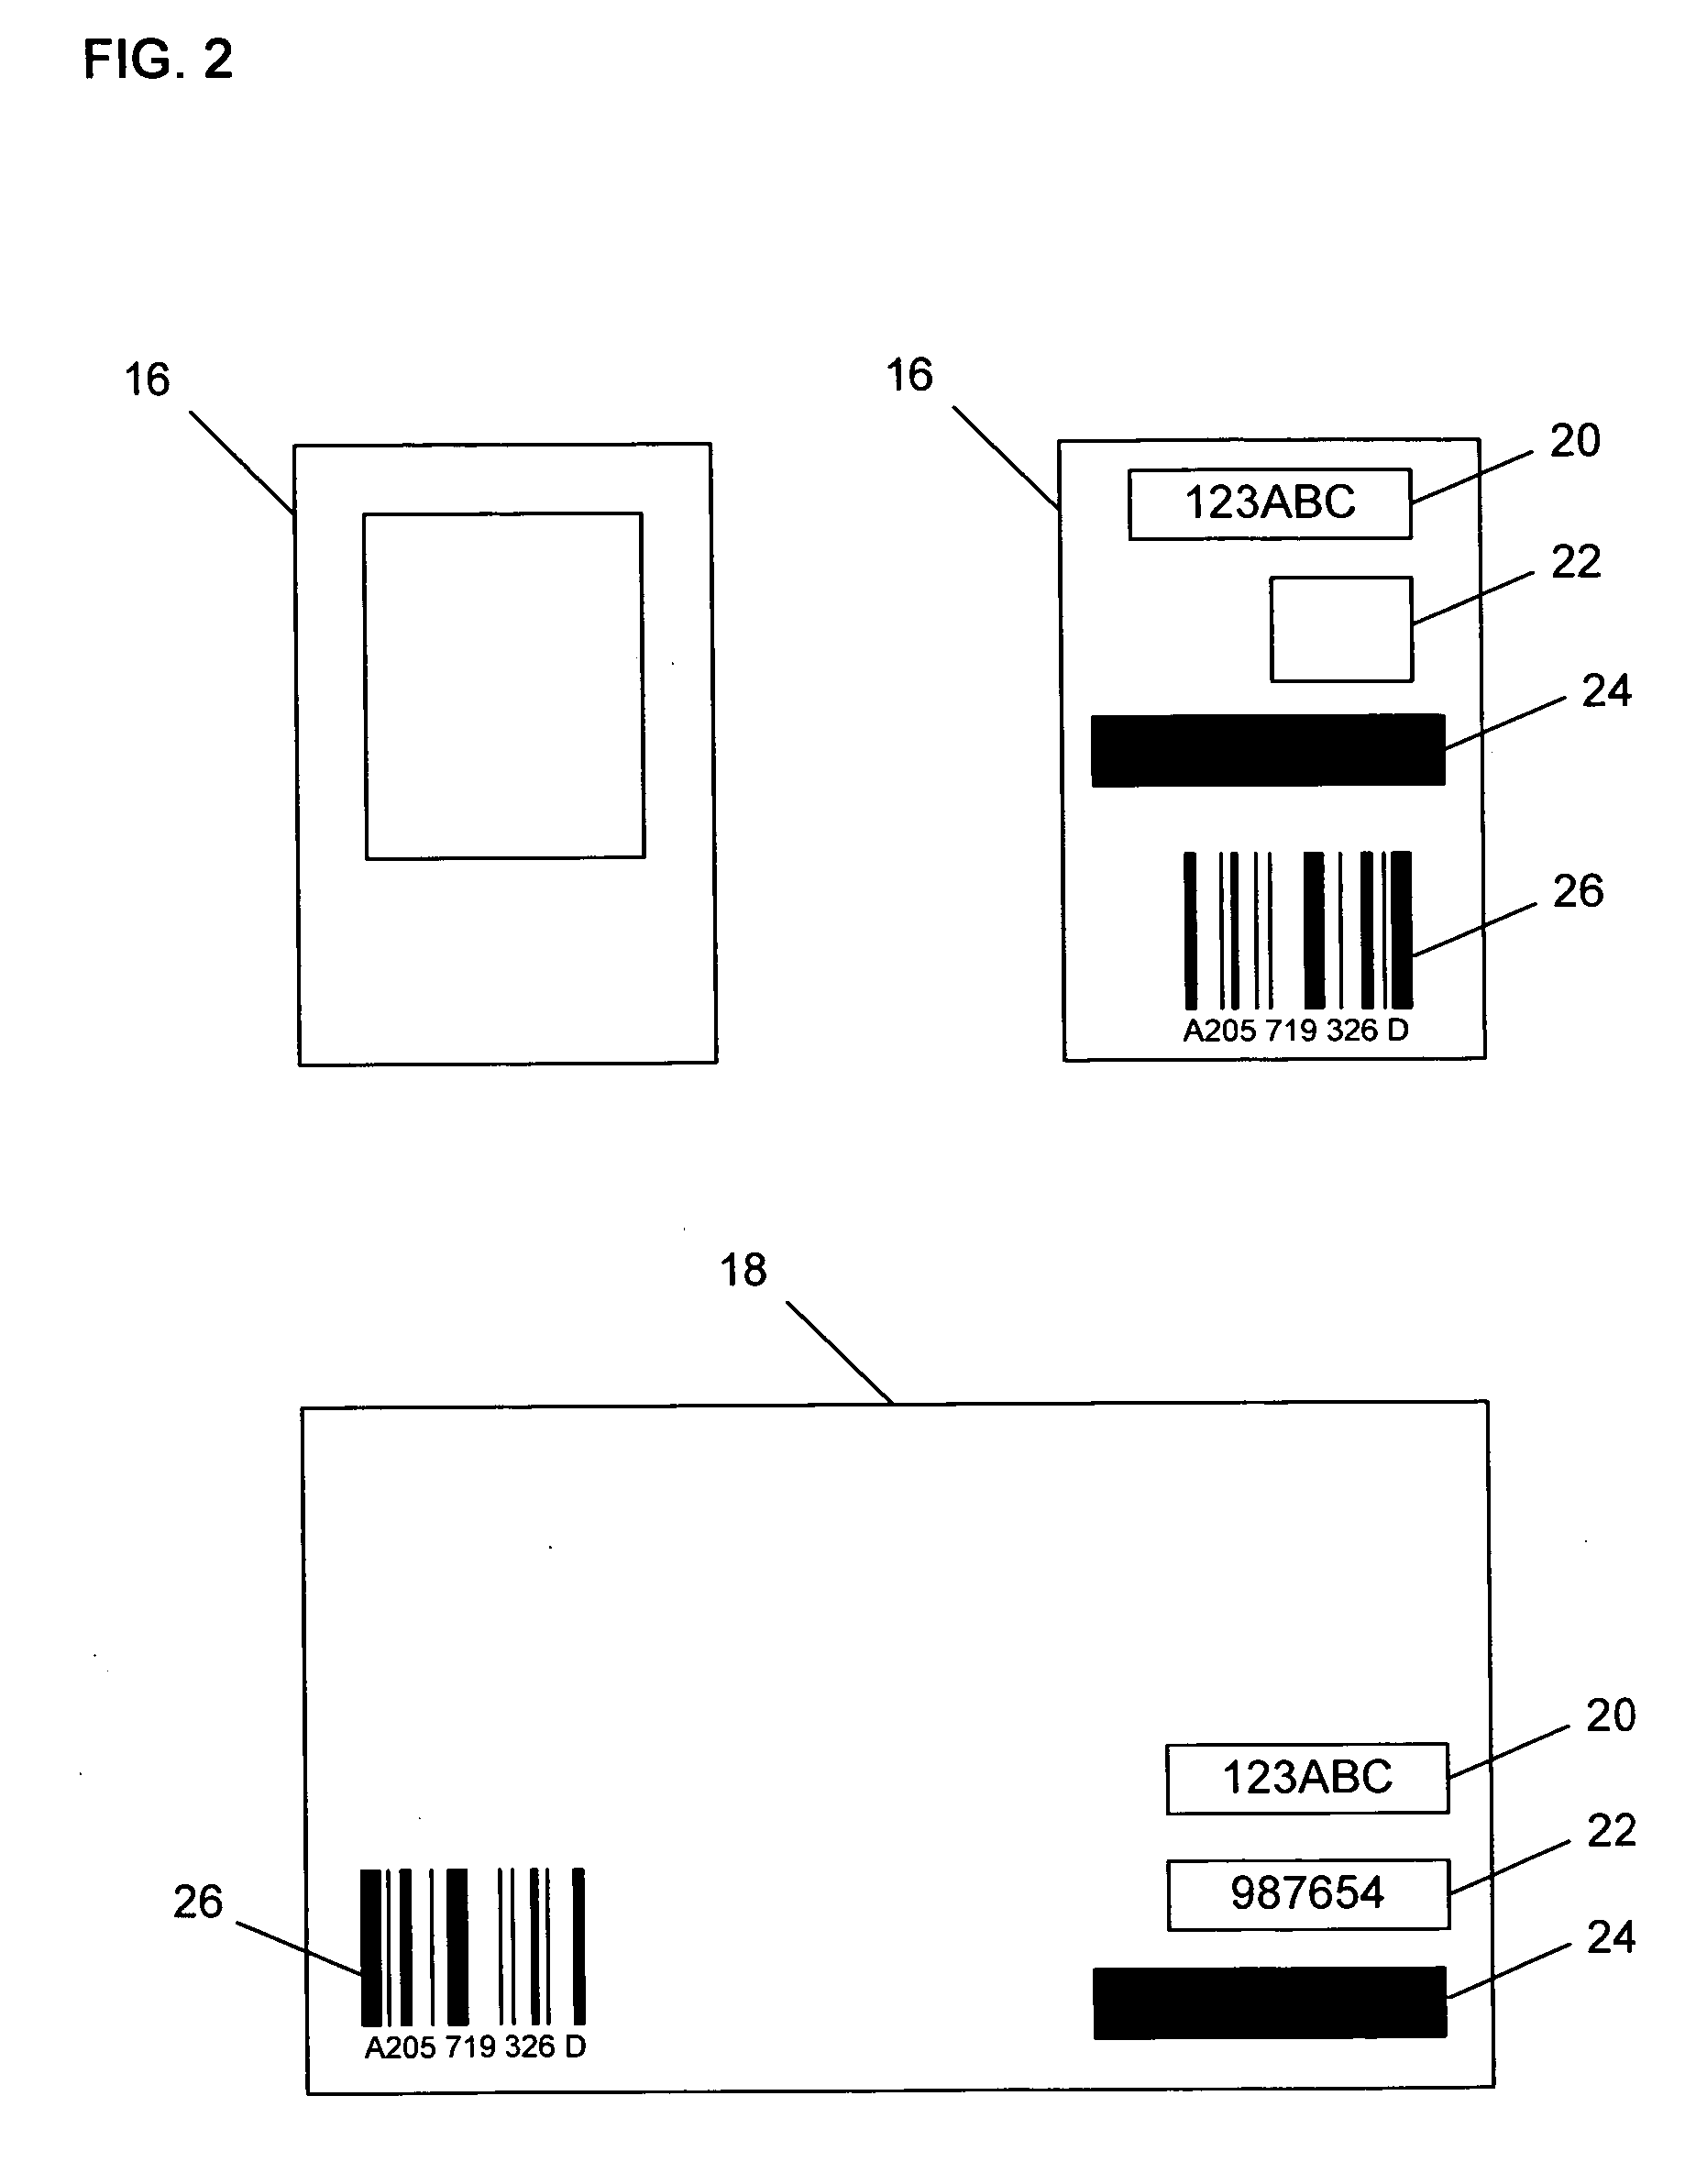 Point-of-sale activation of media device account